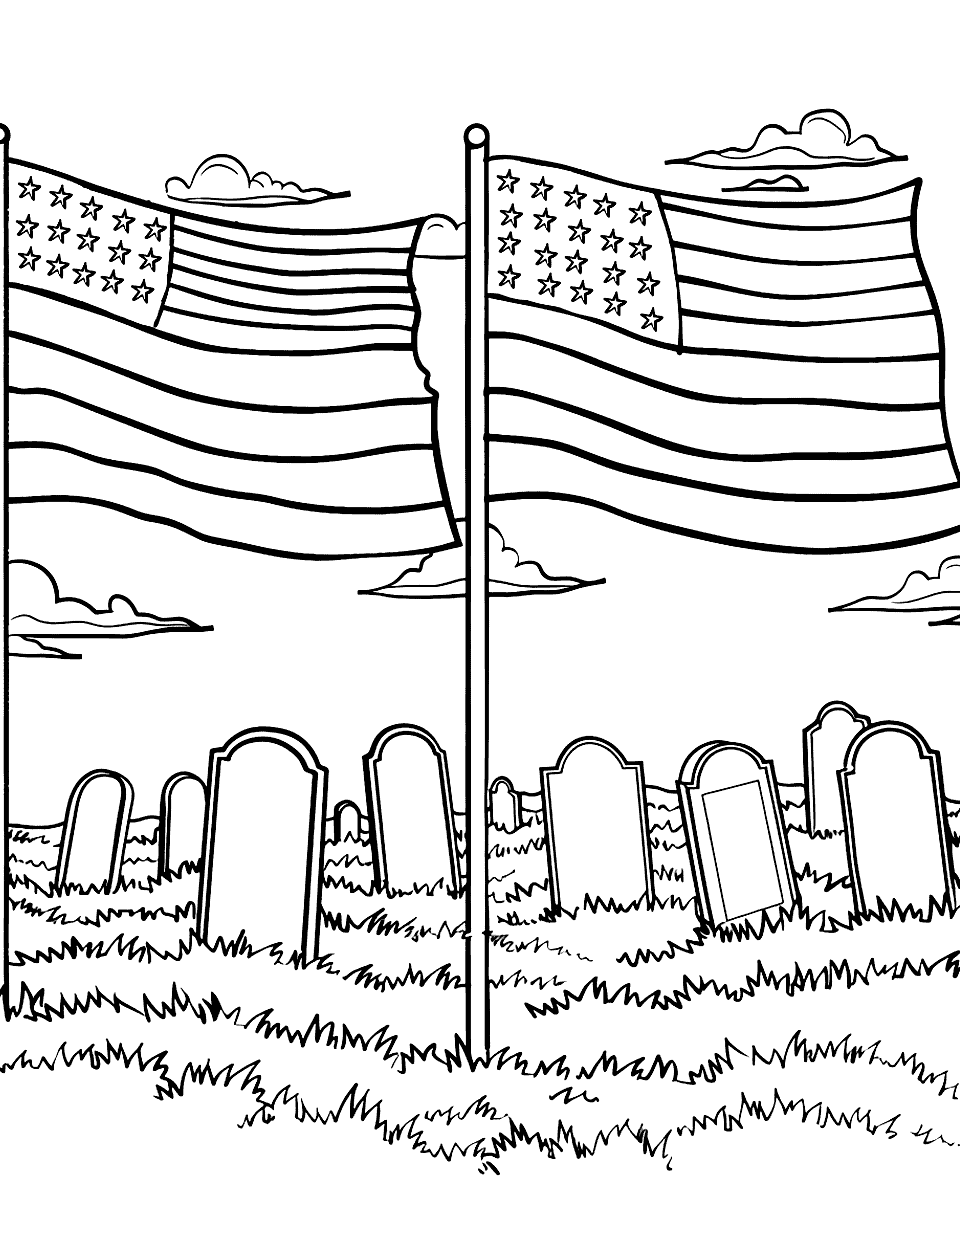 Memorial Day Remembrance American Flag Coloring Page - A scene with American flags placed at gravestones in a cemetery.